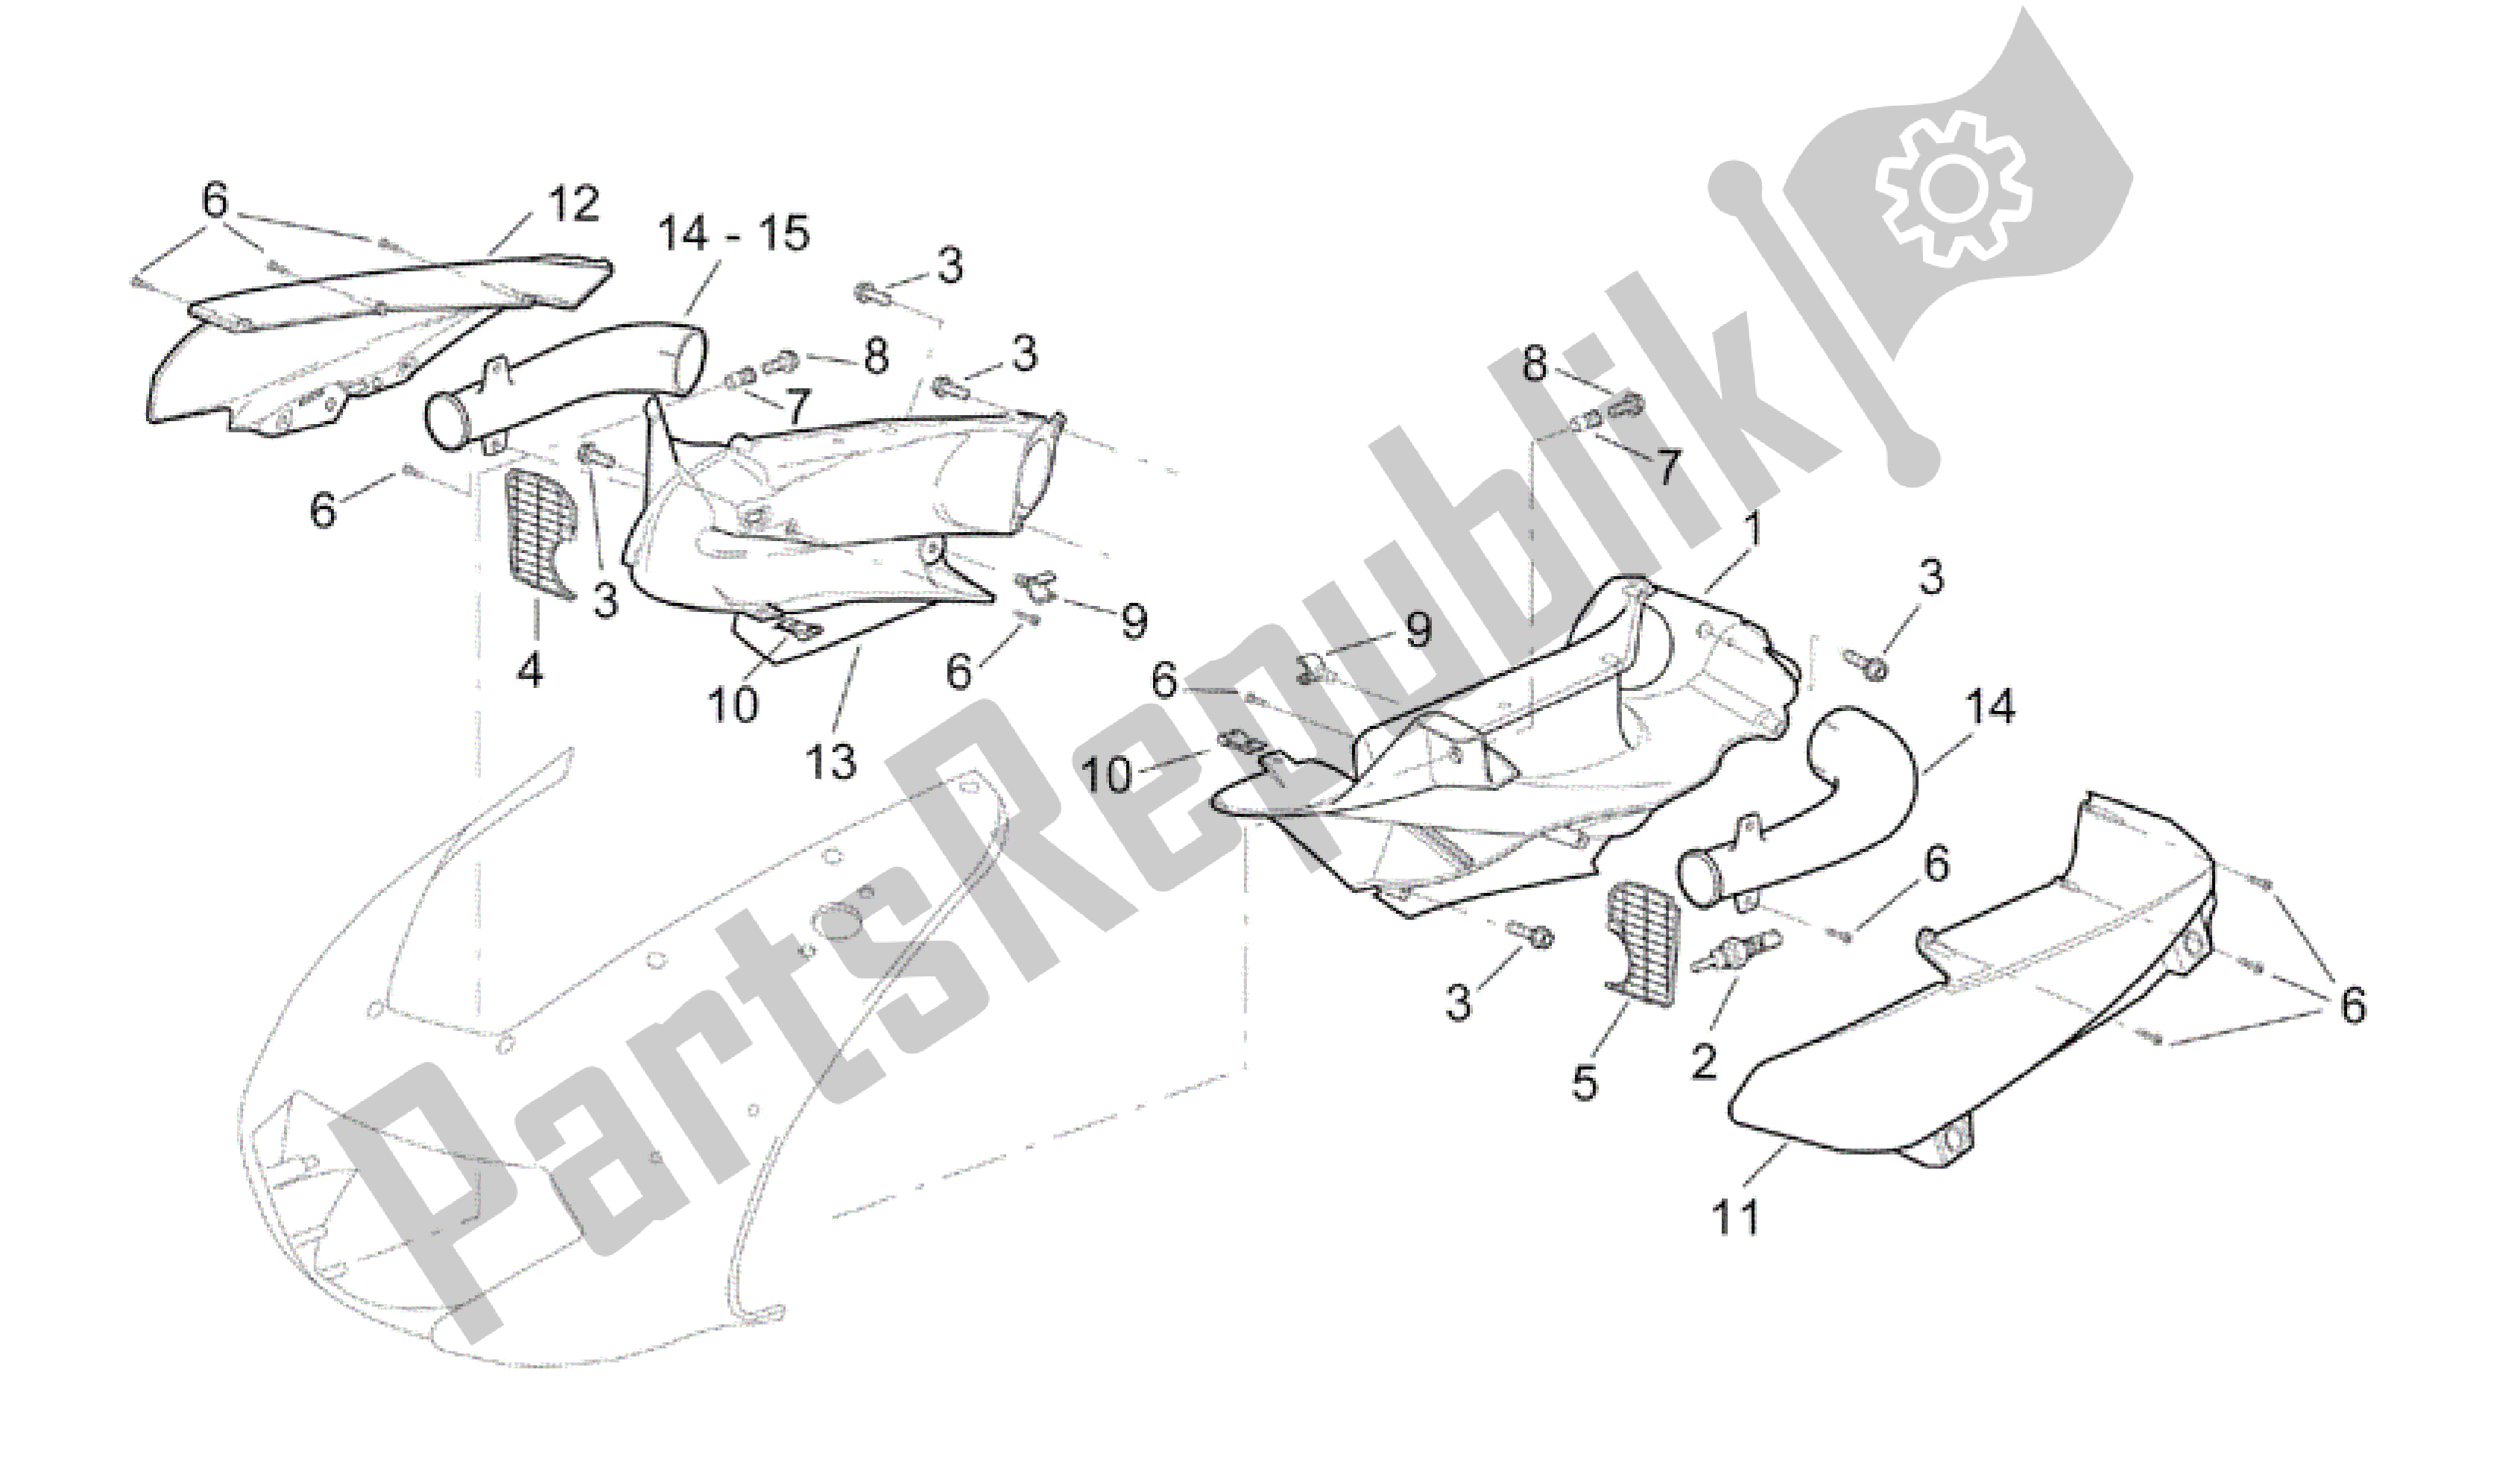 All parts for the Front Body - Duct of the Aprilia RSV Mille 3963 1000 2003